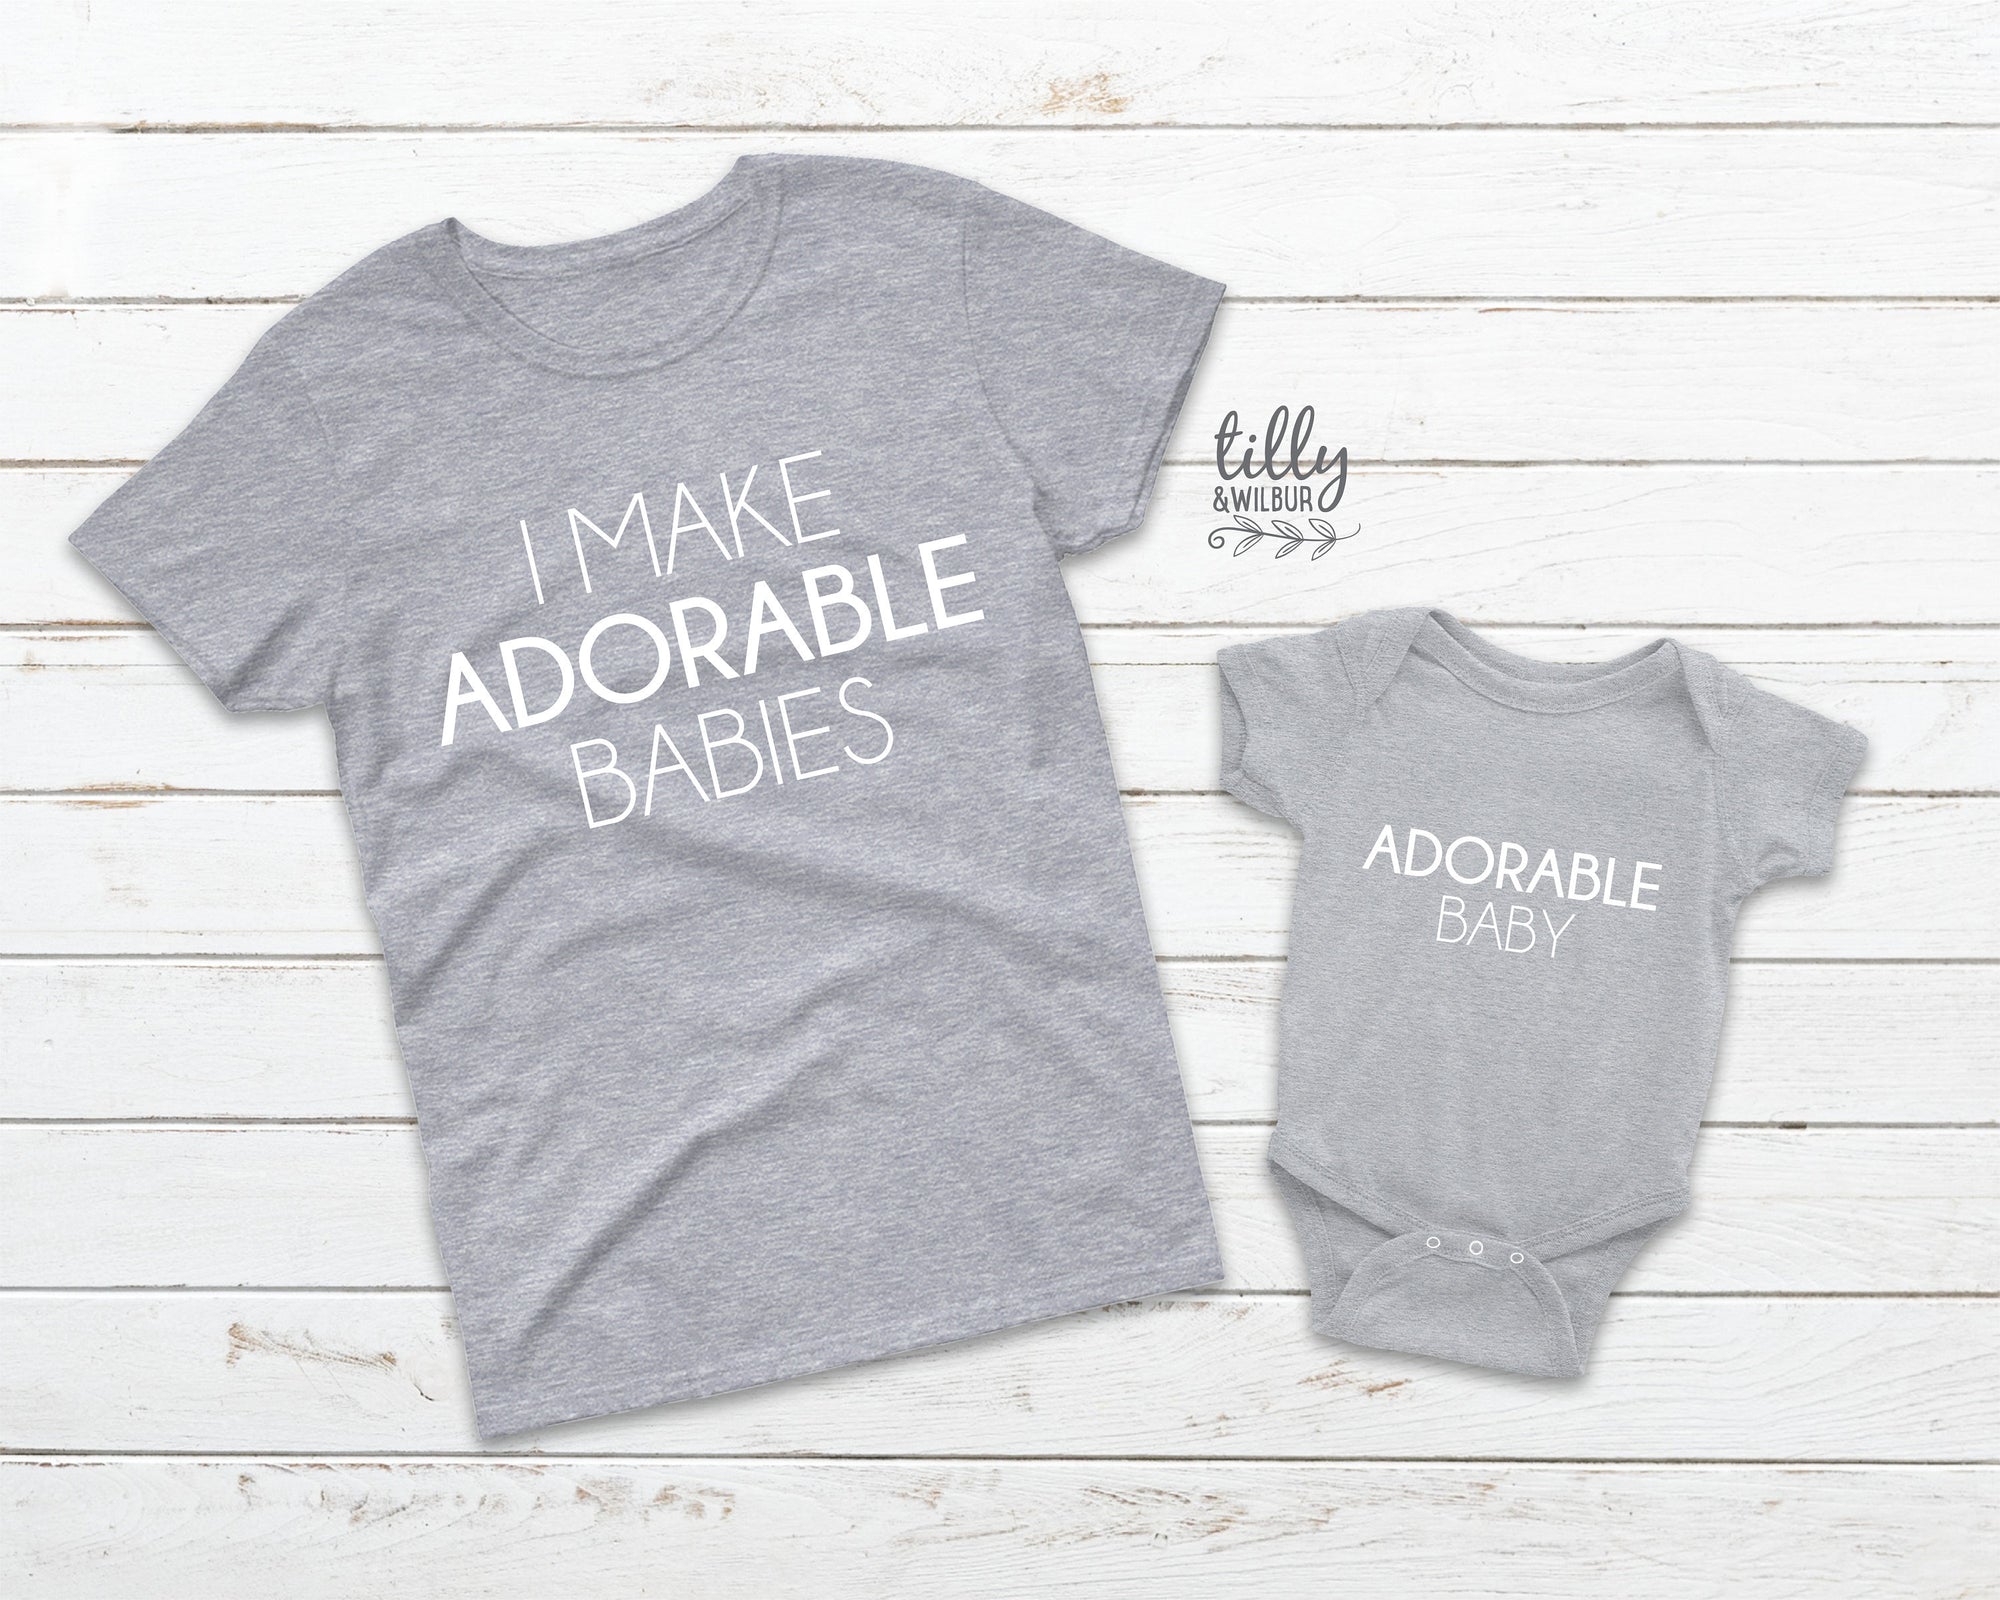 I Make Adorable Babies And Adorable Baby Matching Family T-Shirts, Daddy And Daughter, Father And Son, Matching Dad Baby, Daddy Daughter